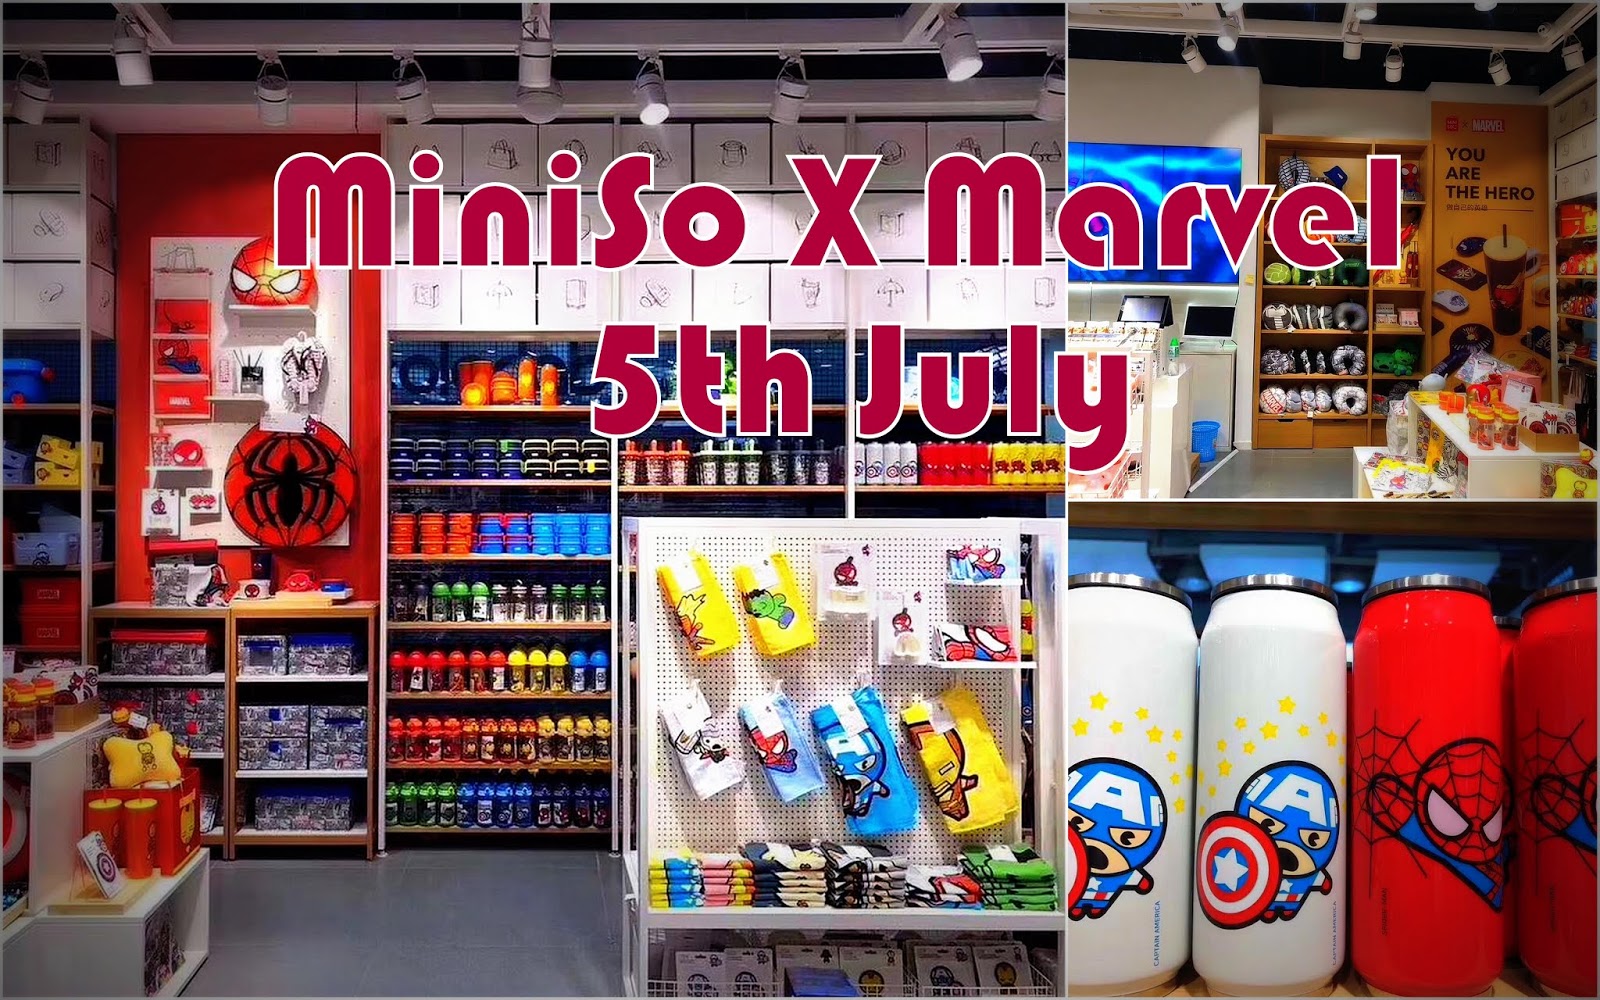  Miniso  Singapore Marvel  Series launch on 5th July The 